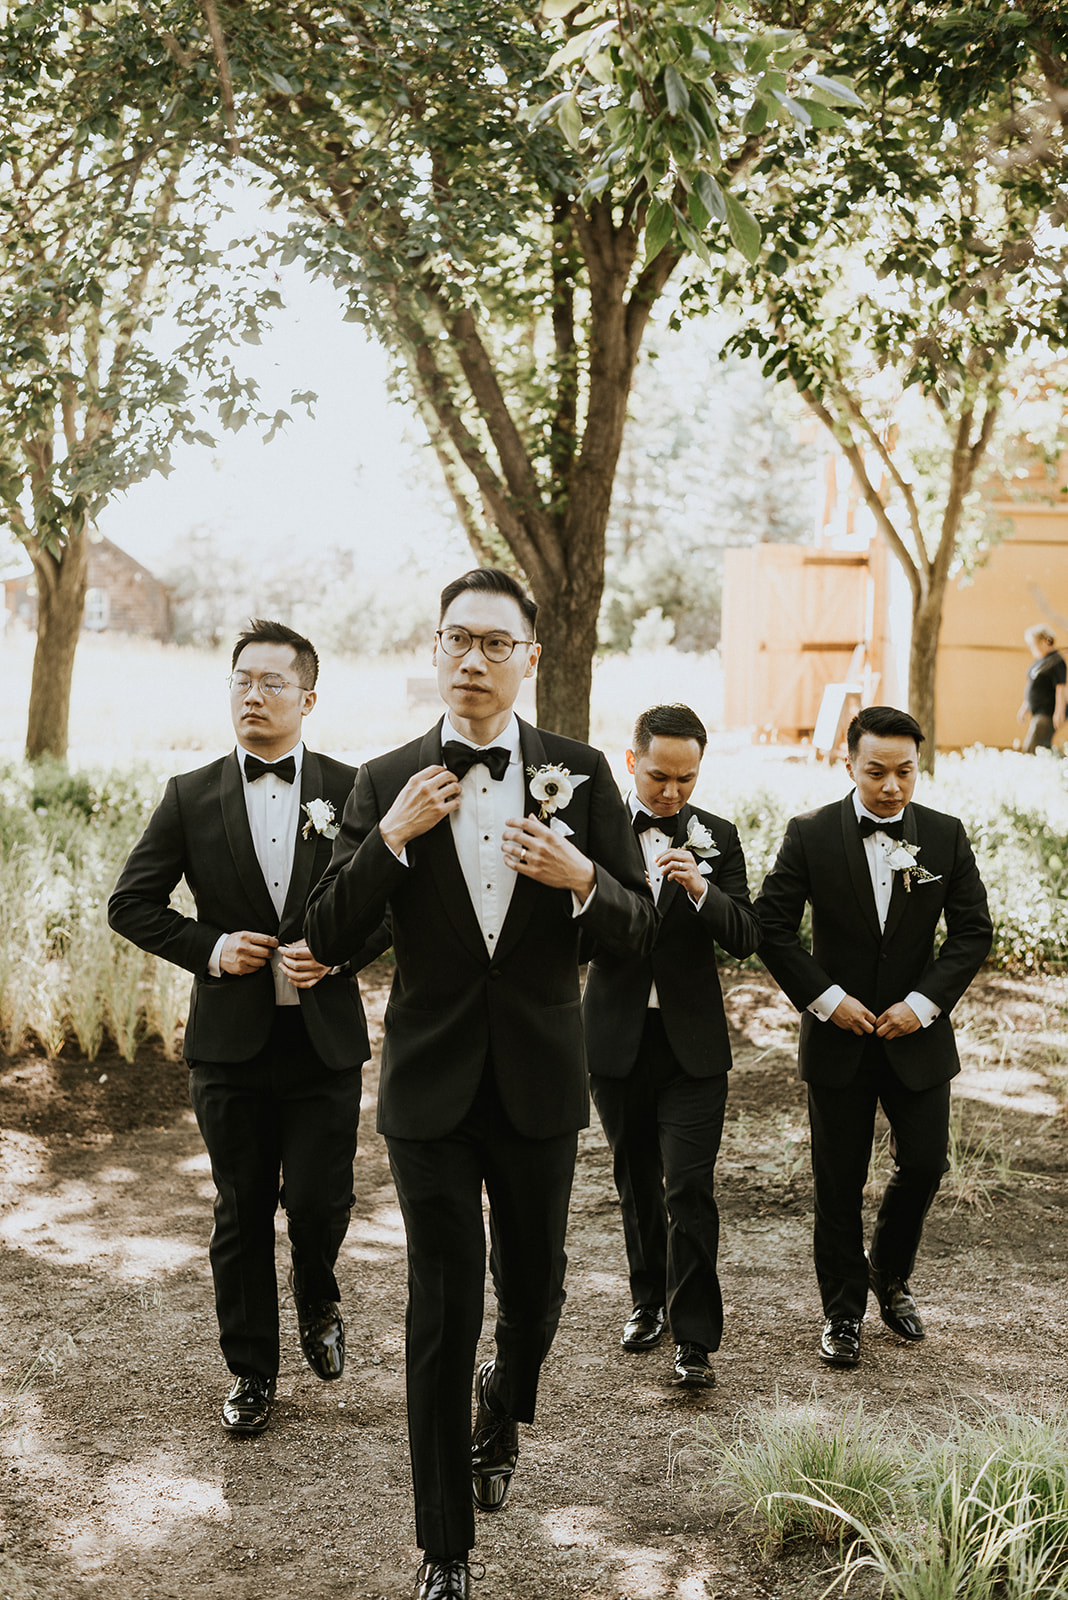 Moody Tones & Minimalist Bridal Style at This Contemporary Summer Wedding at The Coutts Centre featured on Brontë Bride Groomsmen Attire